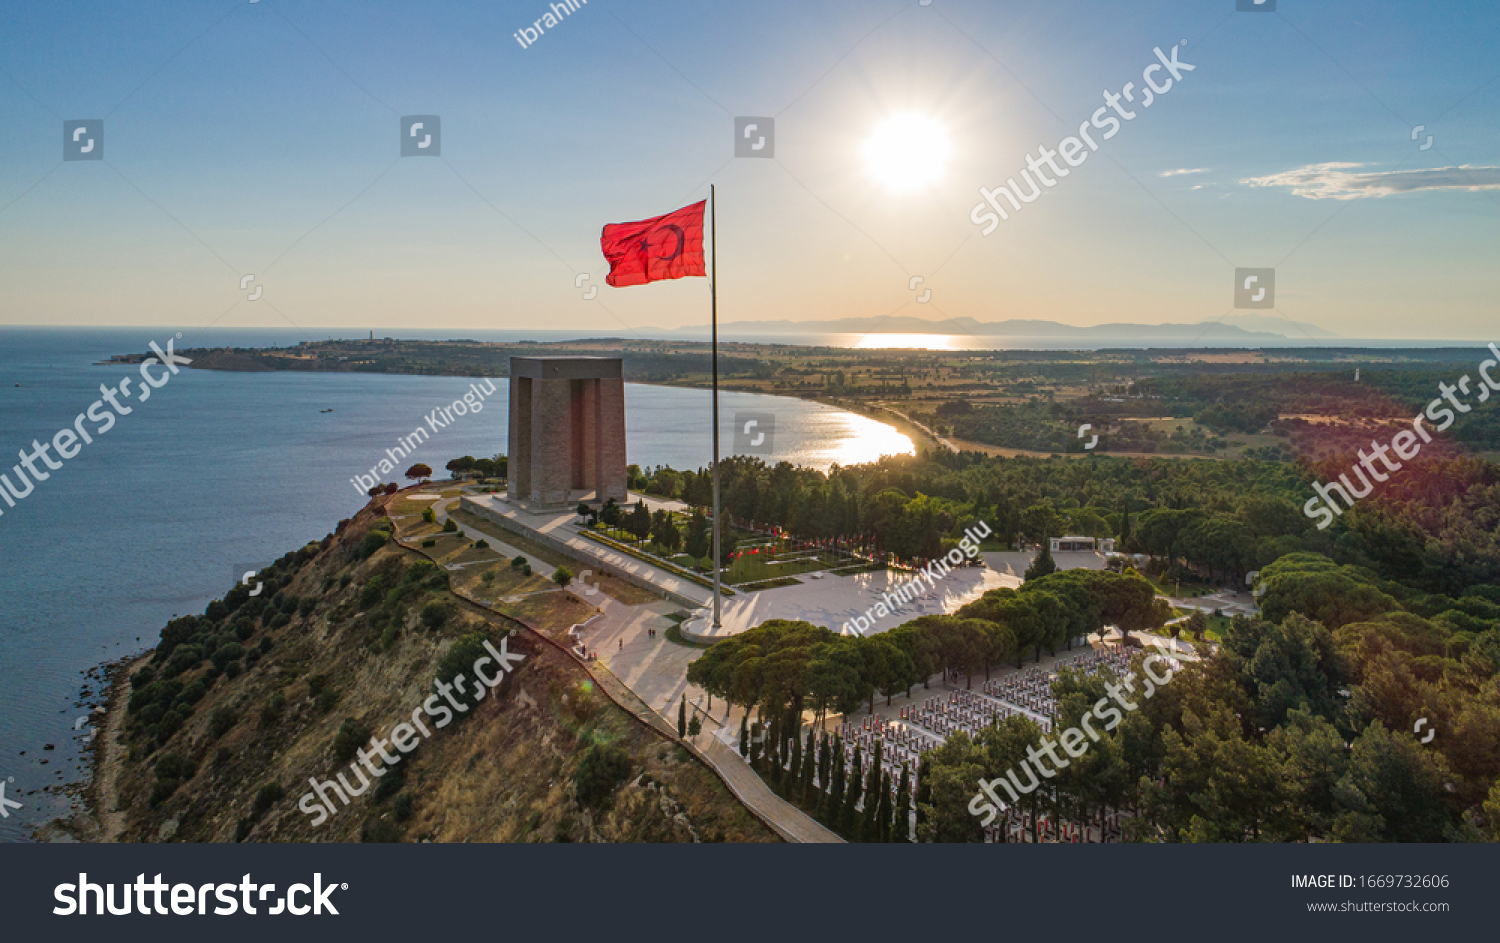 Canakkale Martyrs Memorial is a commemoration to the service of Turkish soldiers who participated at the Battle of Gallipoli, during the First World War #1669732606